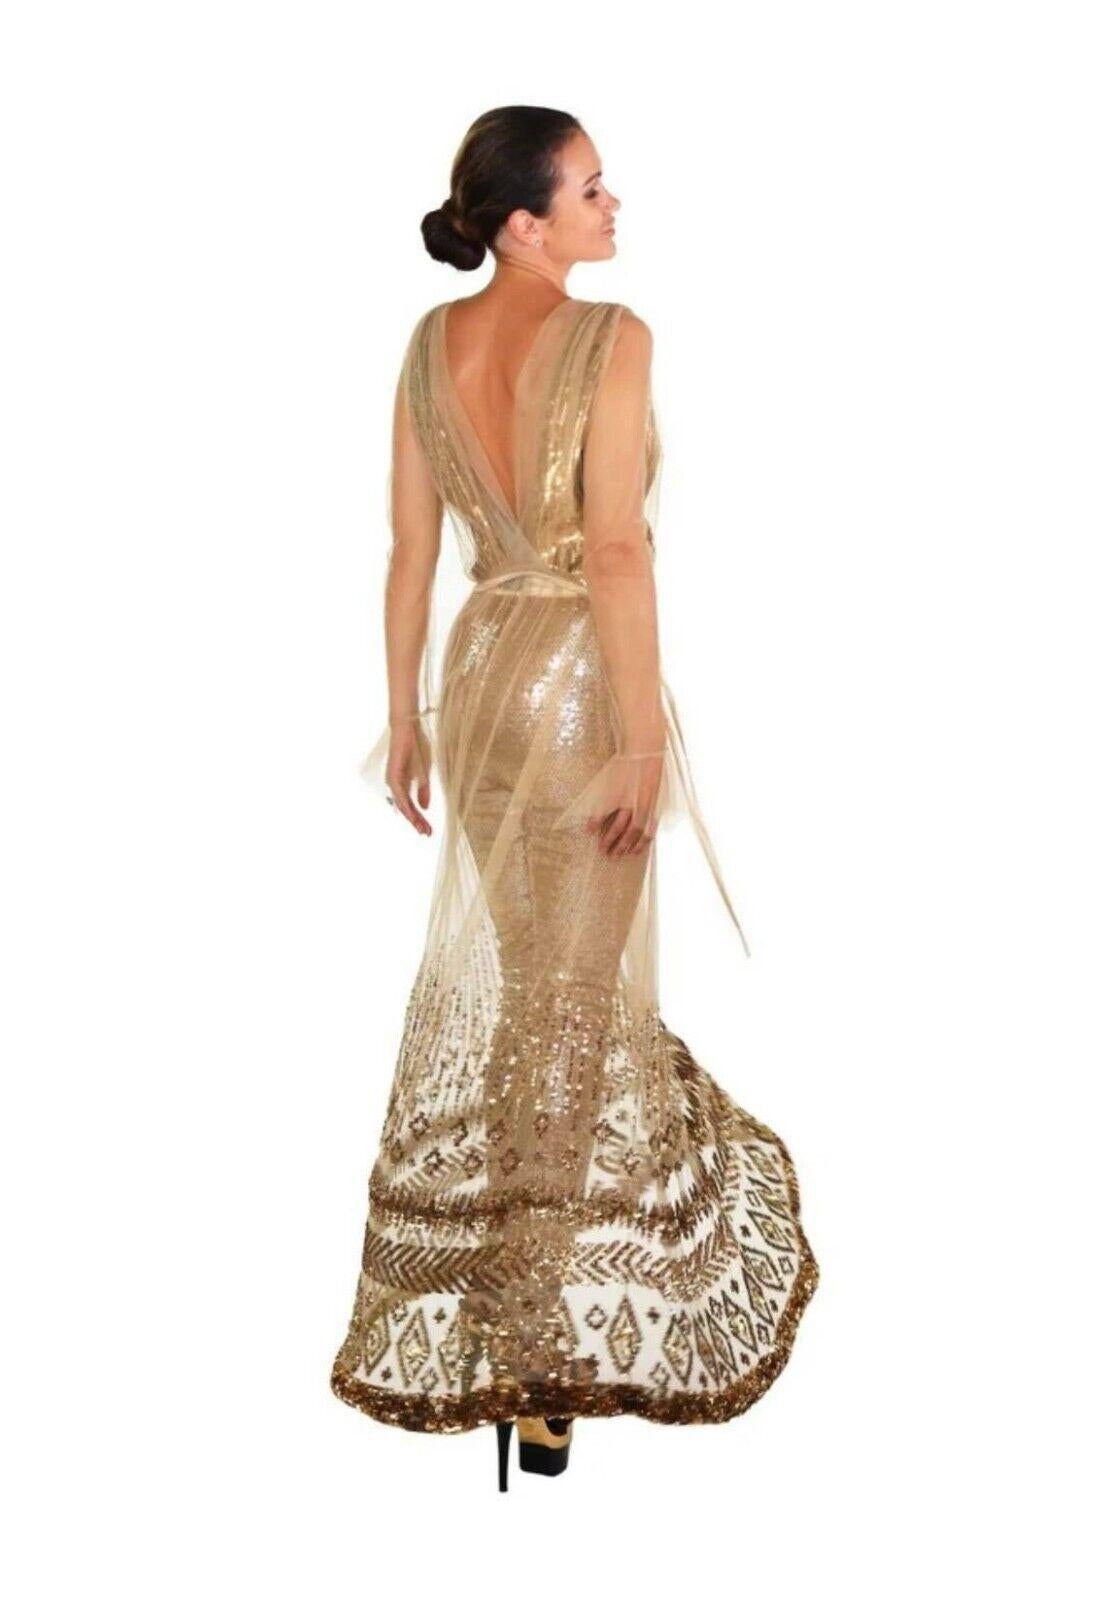 New Tom Ford Nude Embellished Chiffon Dress w/ Gold Sequin Pants 38 - 2 For Sale 6